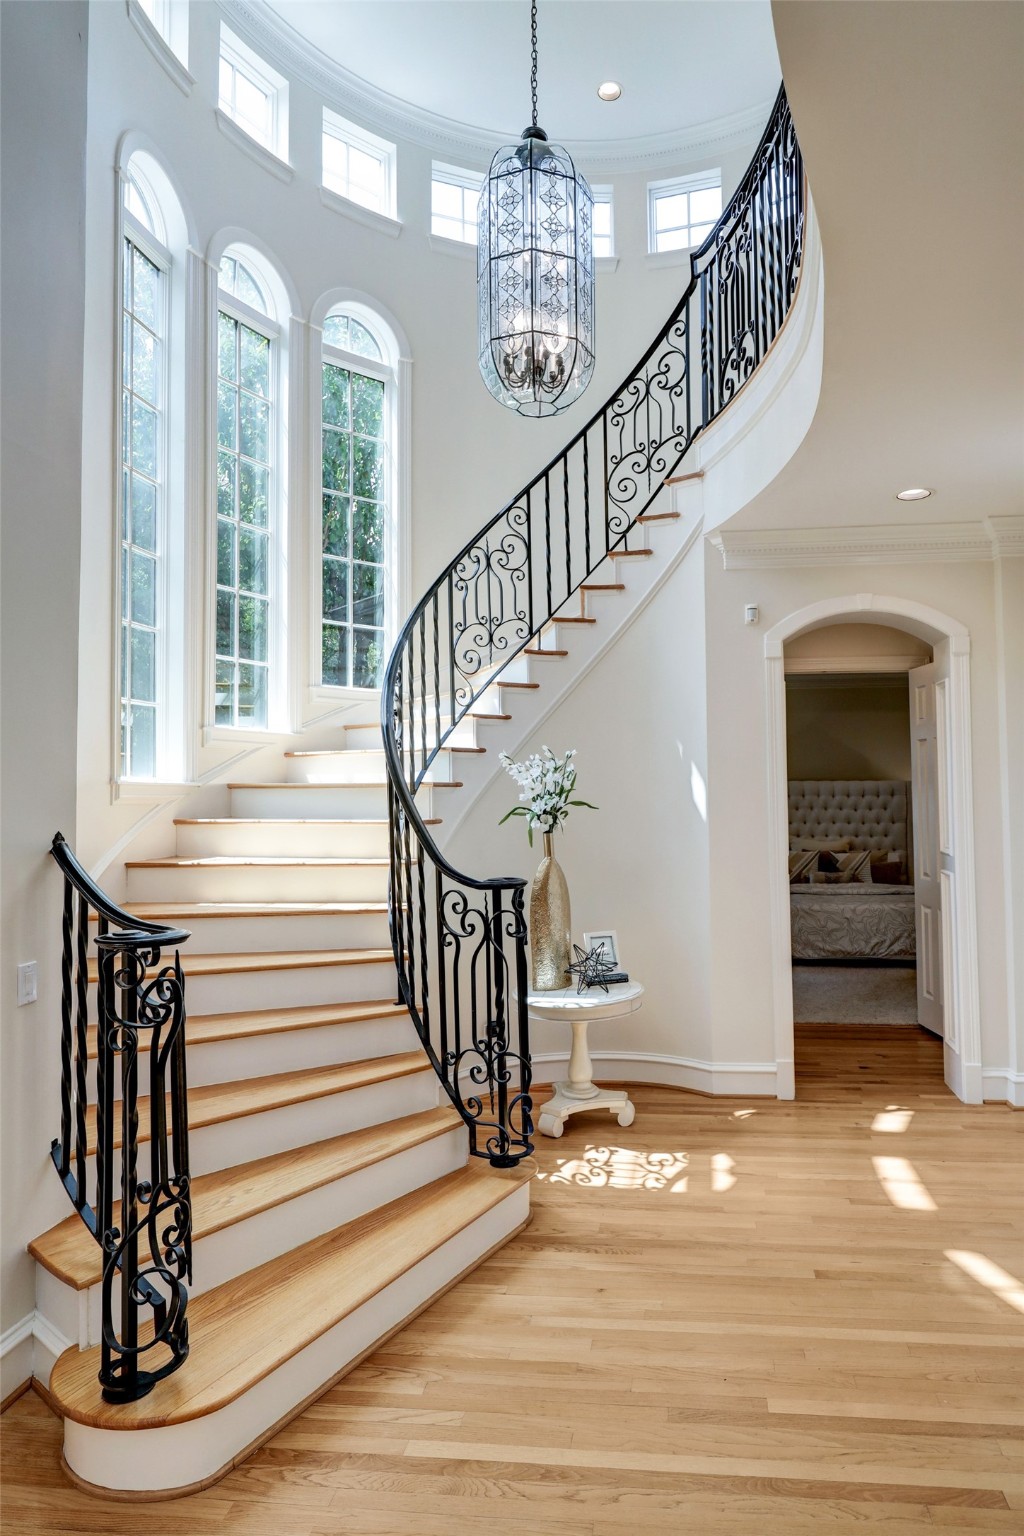 The sweeping staircase is dramatic and light-filled.